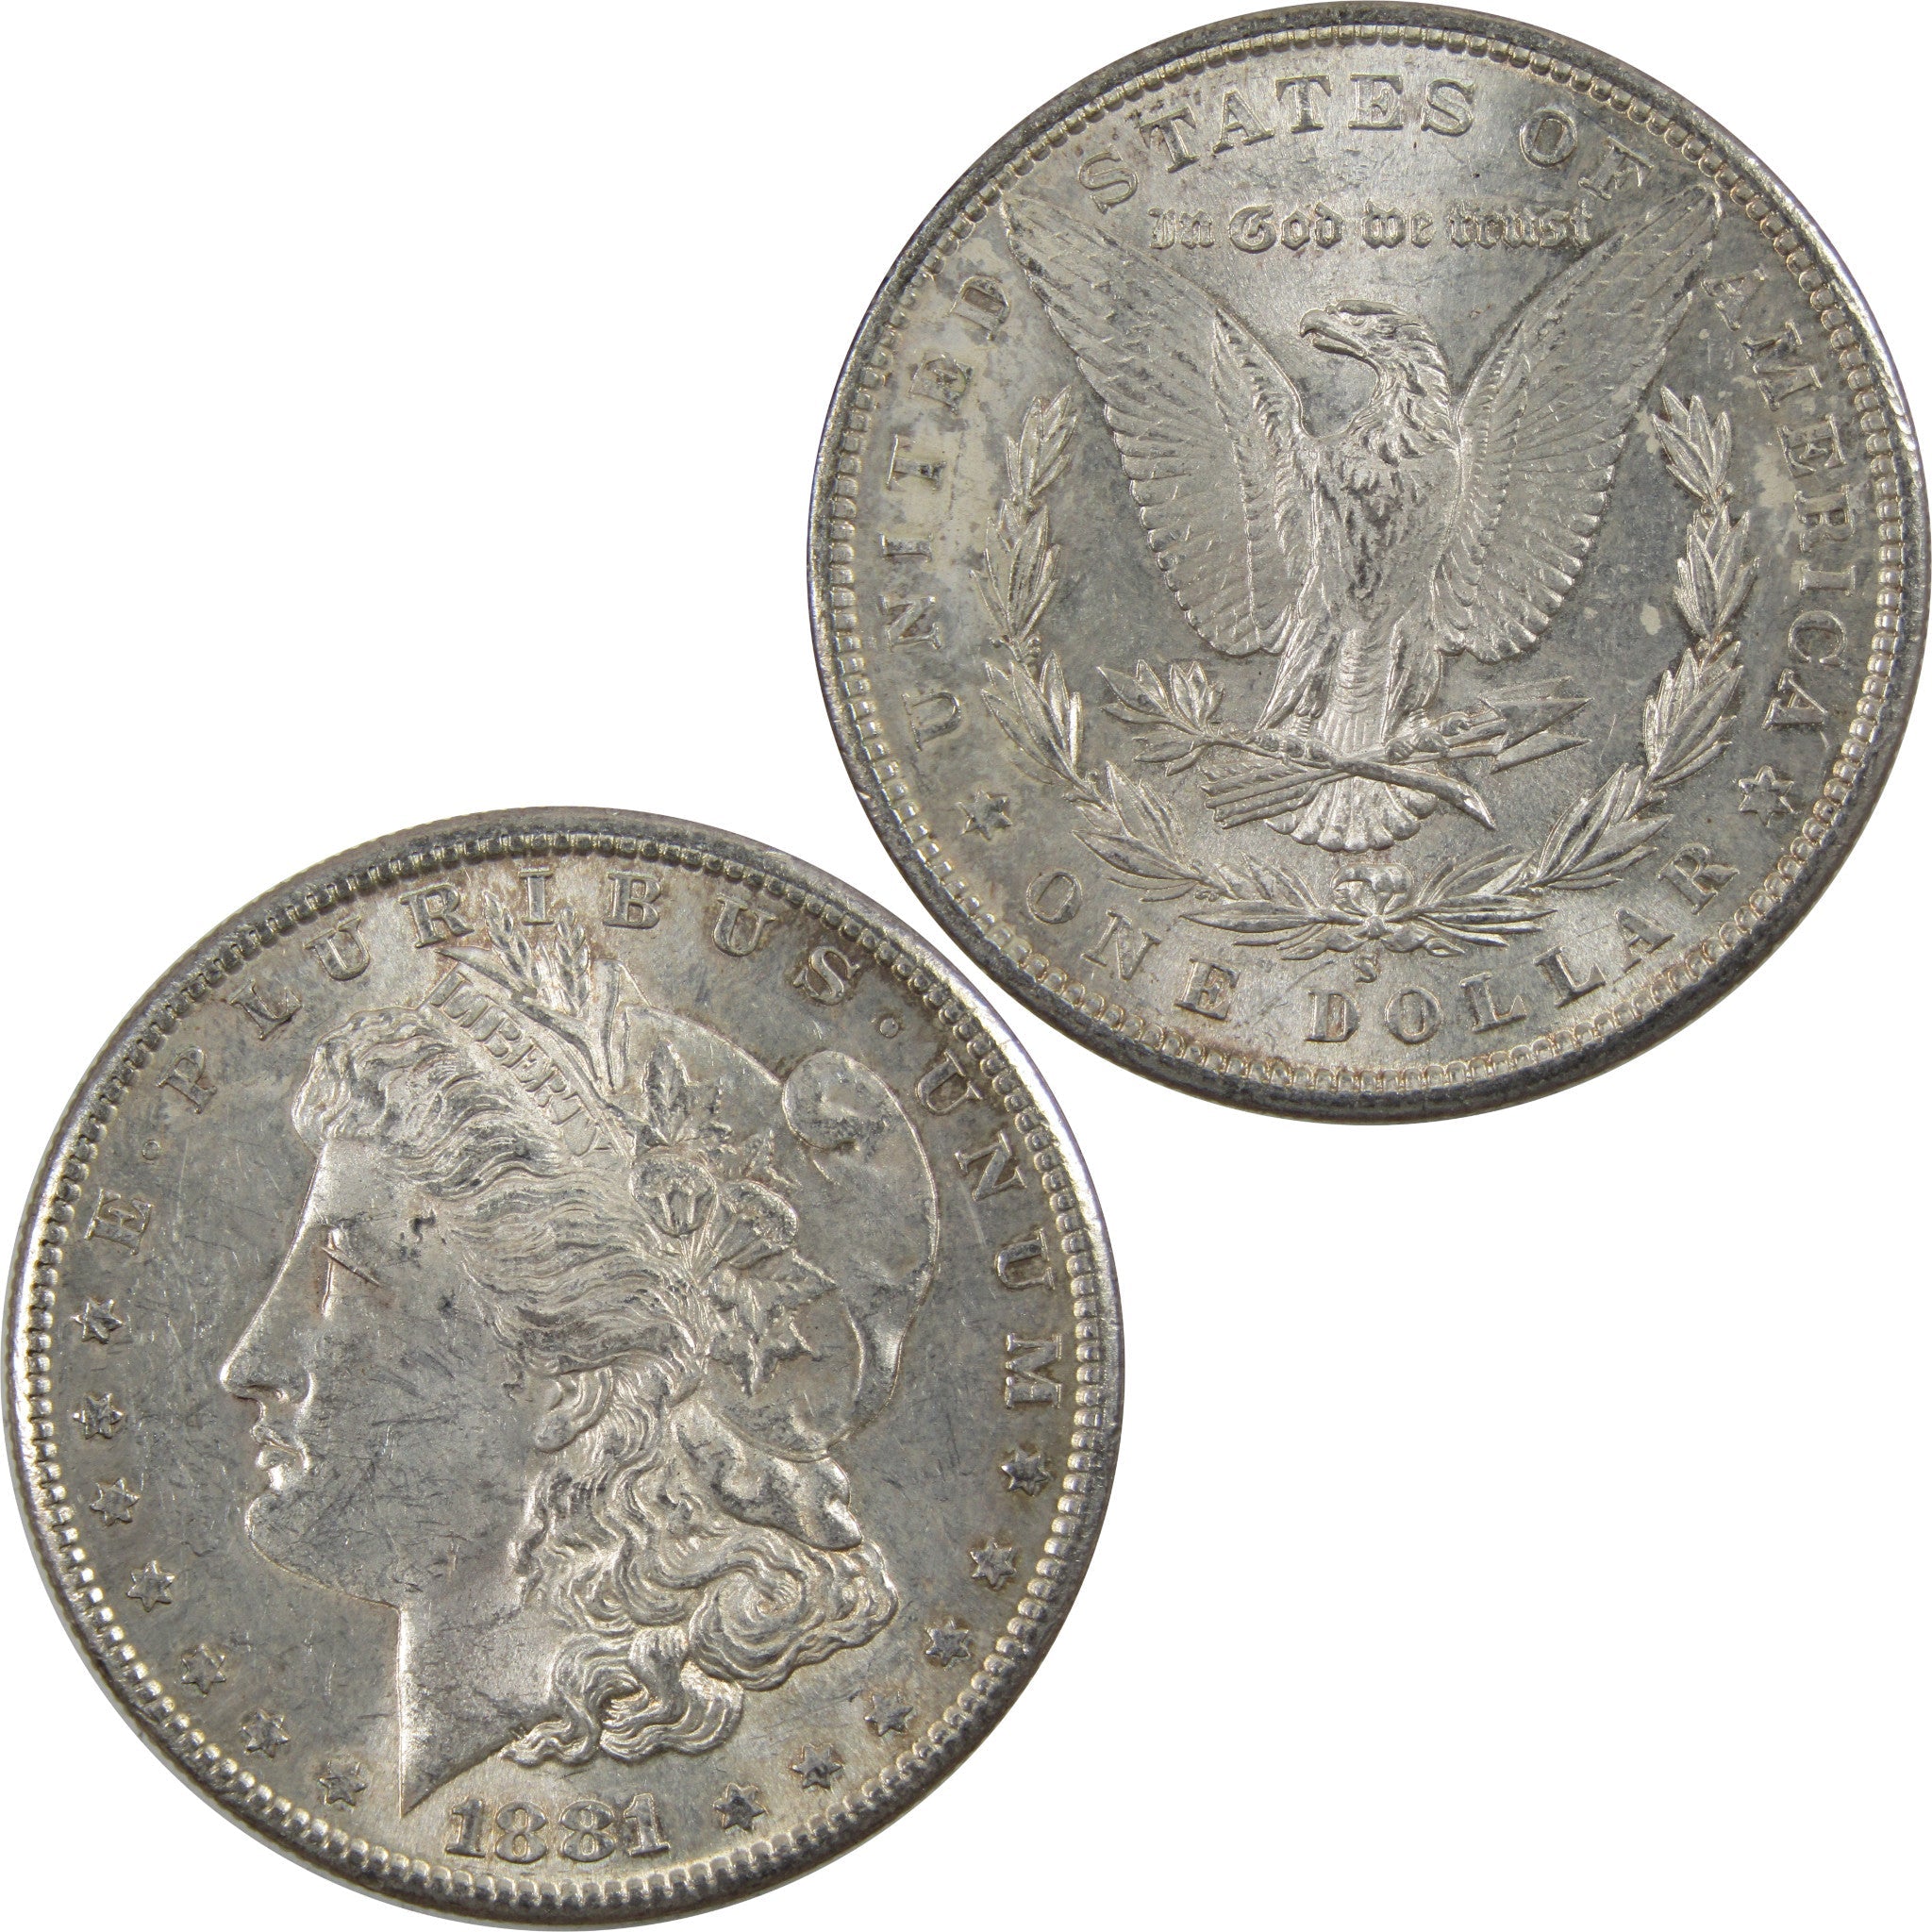 1881 S Morgan Dollar AU About Uncirculated 90% Silver $1 SKU:I5470 - Morgan coin - Morgan silver dollar - Morgan silver dollar for sale - Profile Coins &amp; Collectibles